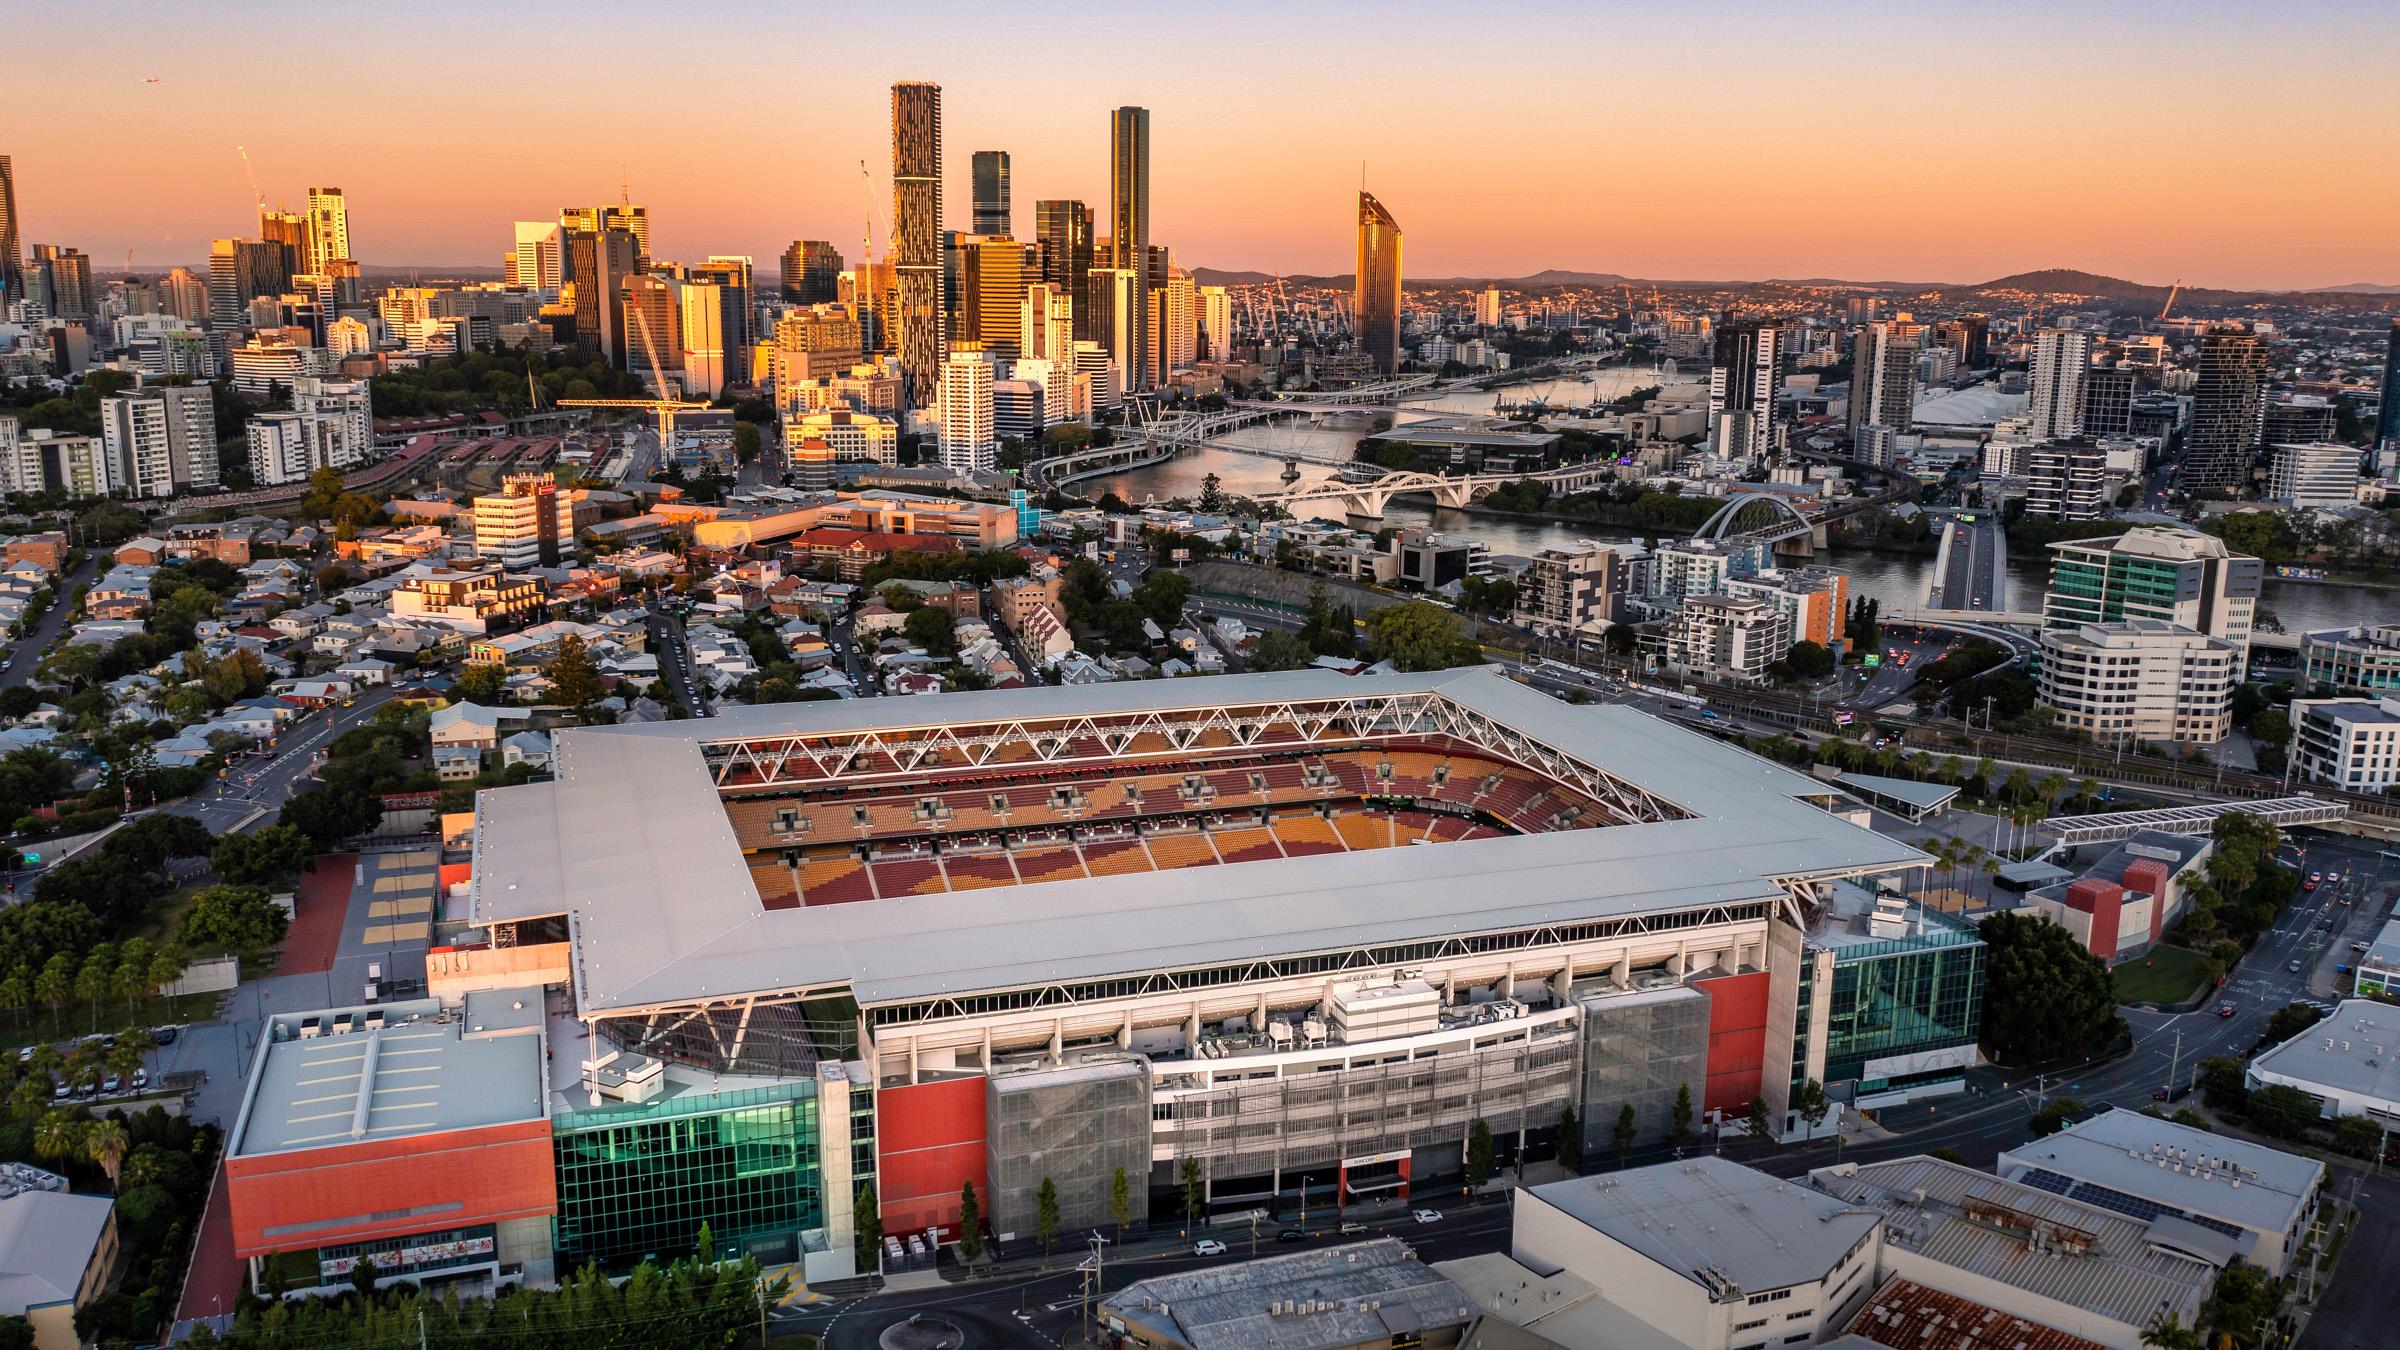 Aerial shot of Suncorp Stadium at sunset, with Brisbane City in the background